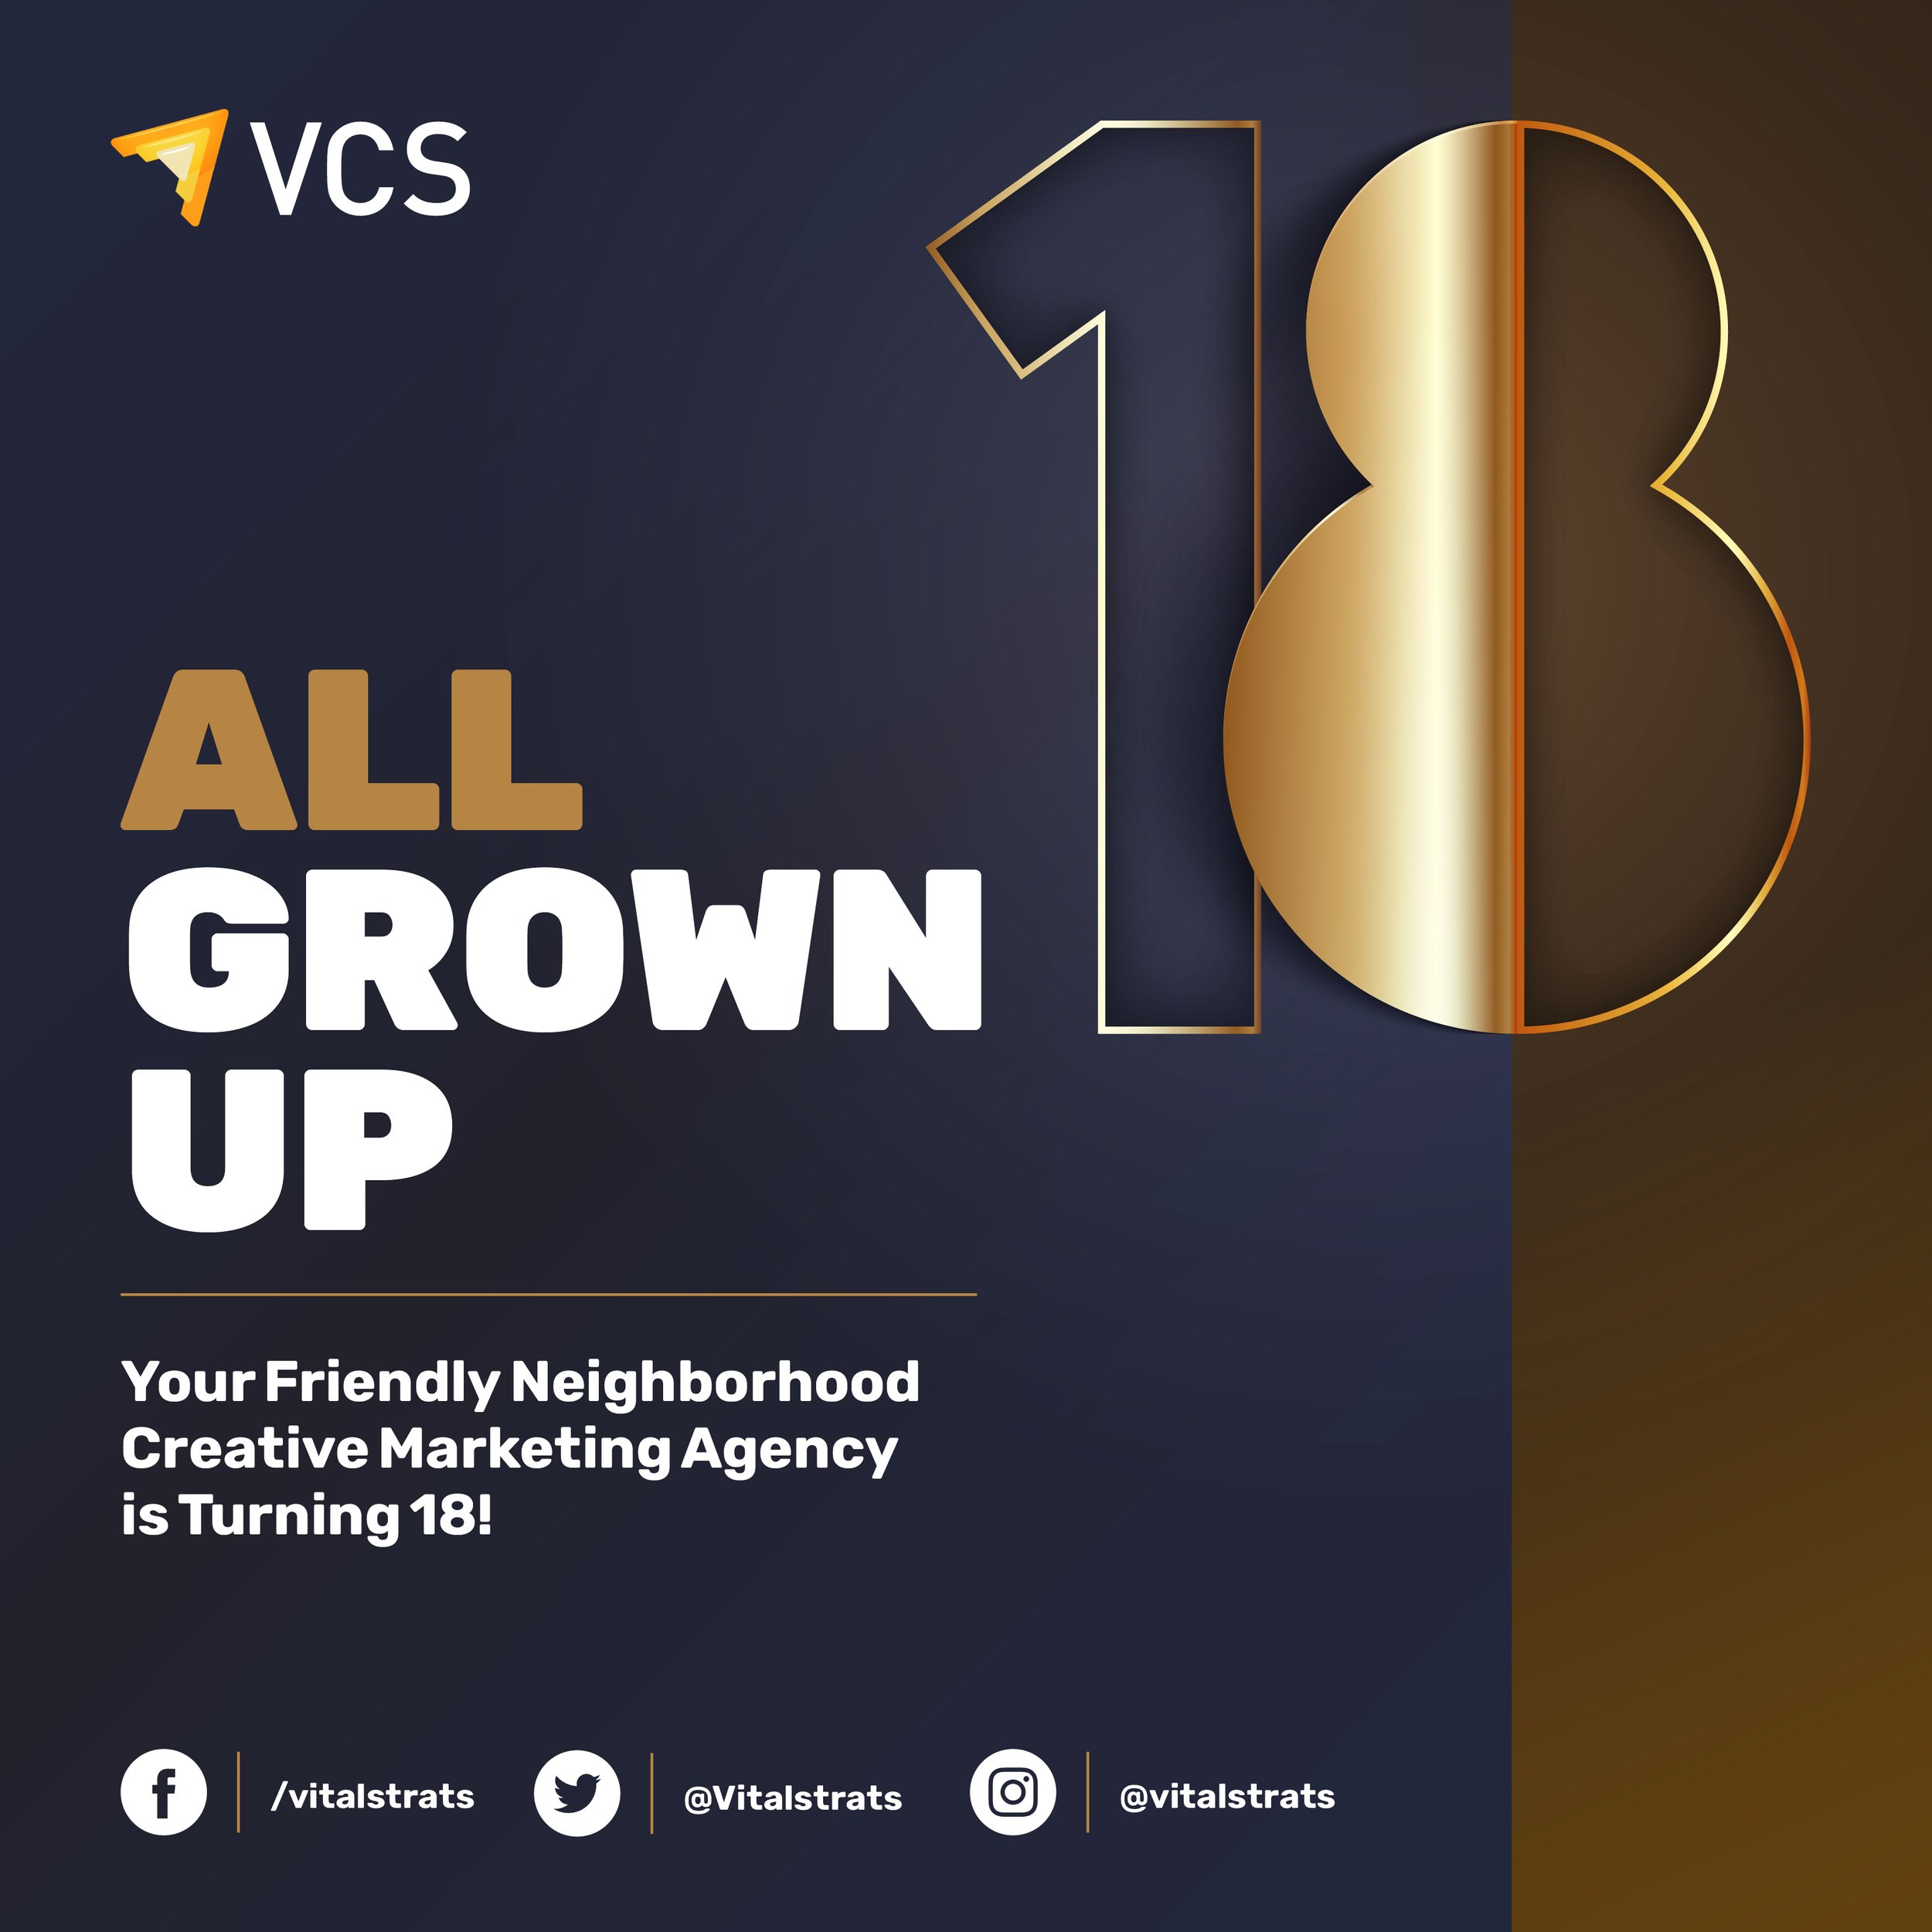 ALL GROWN UP: YOUR FRIENDLY NEIGHBORHOOD CREATIVE MARKETING AGENCY IS TURNING 18